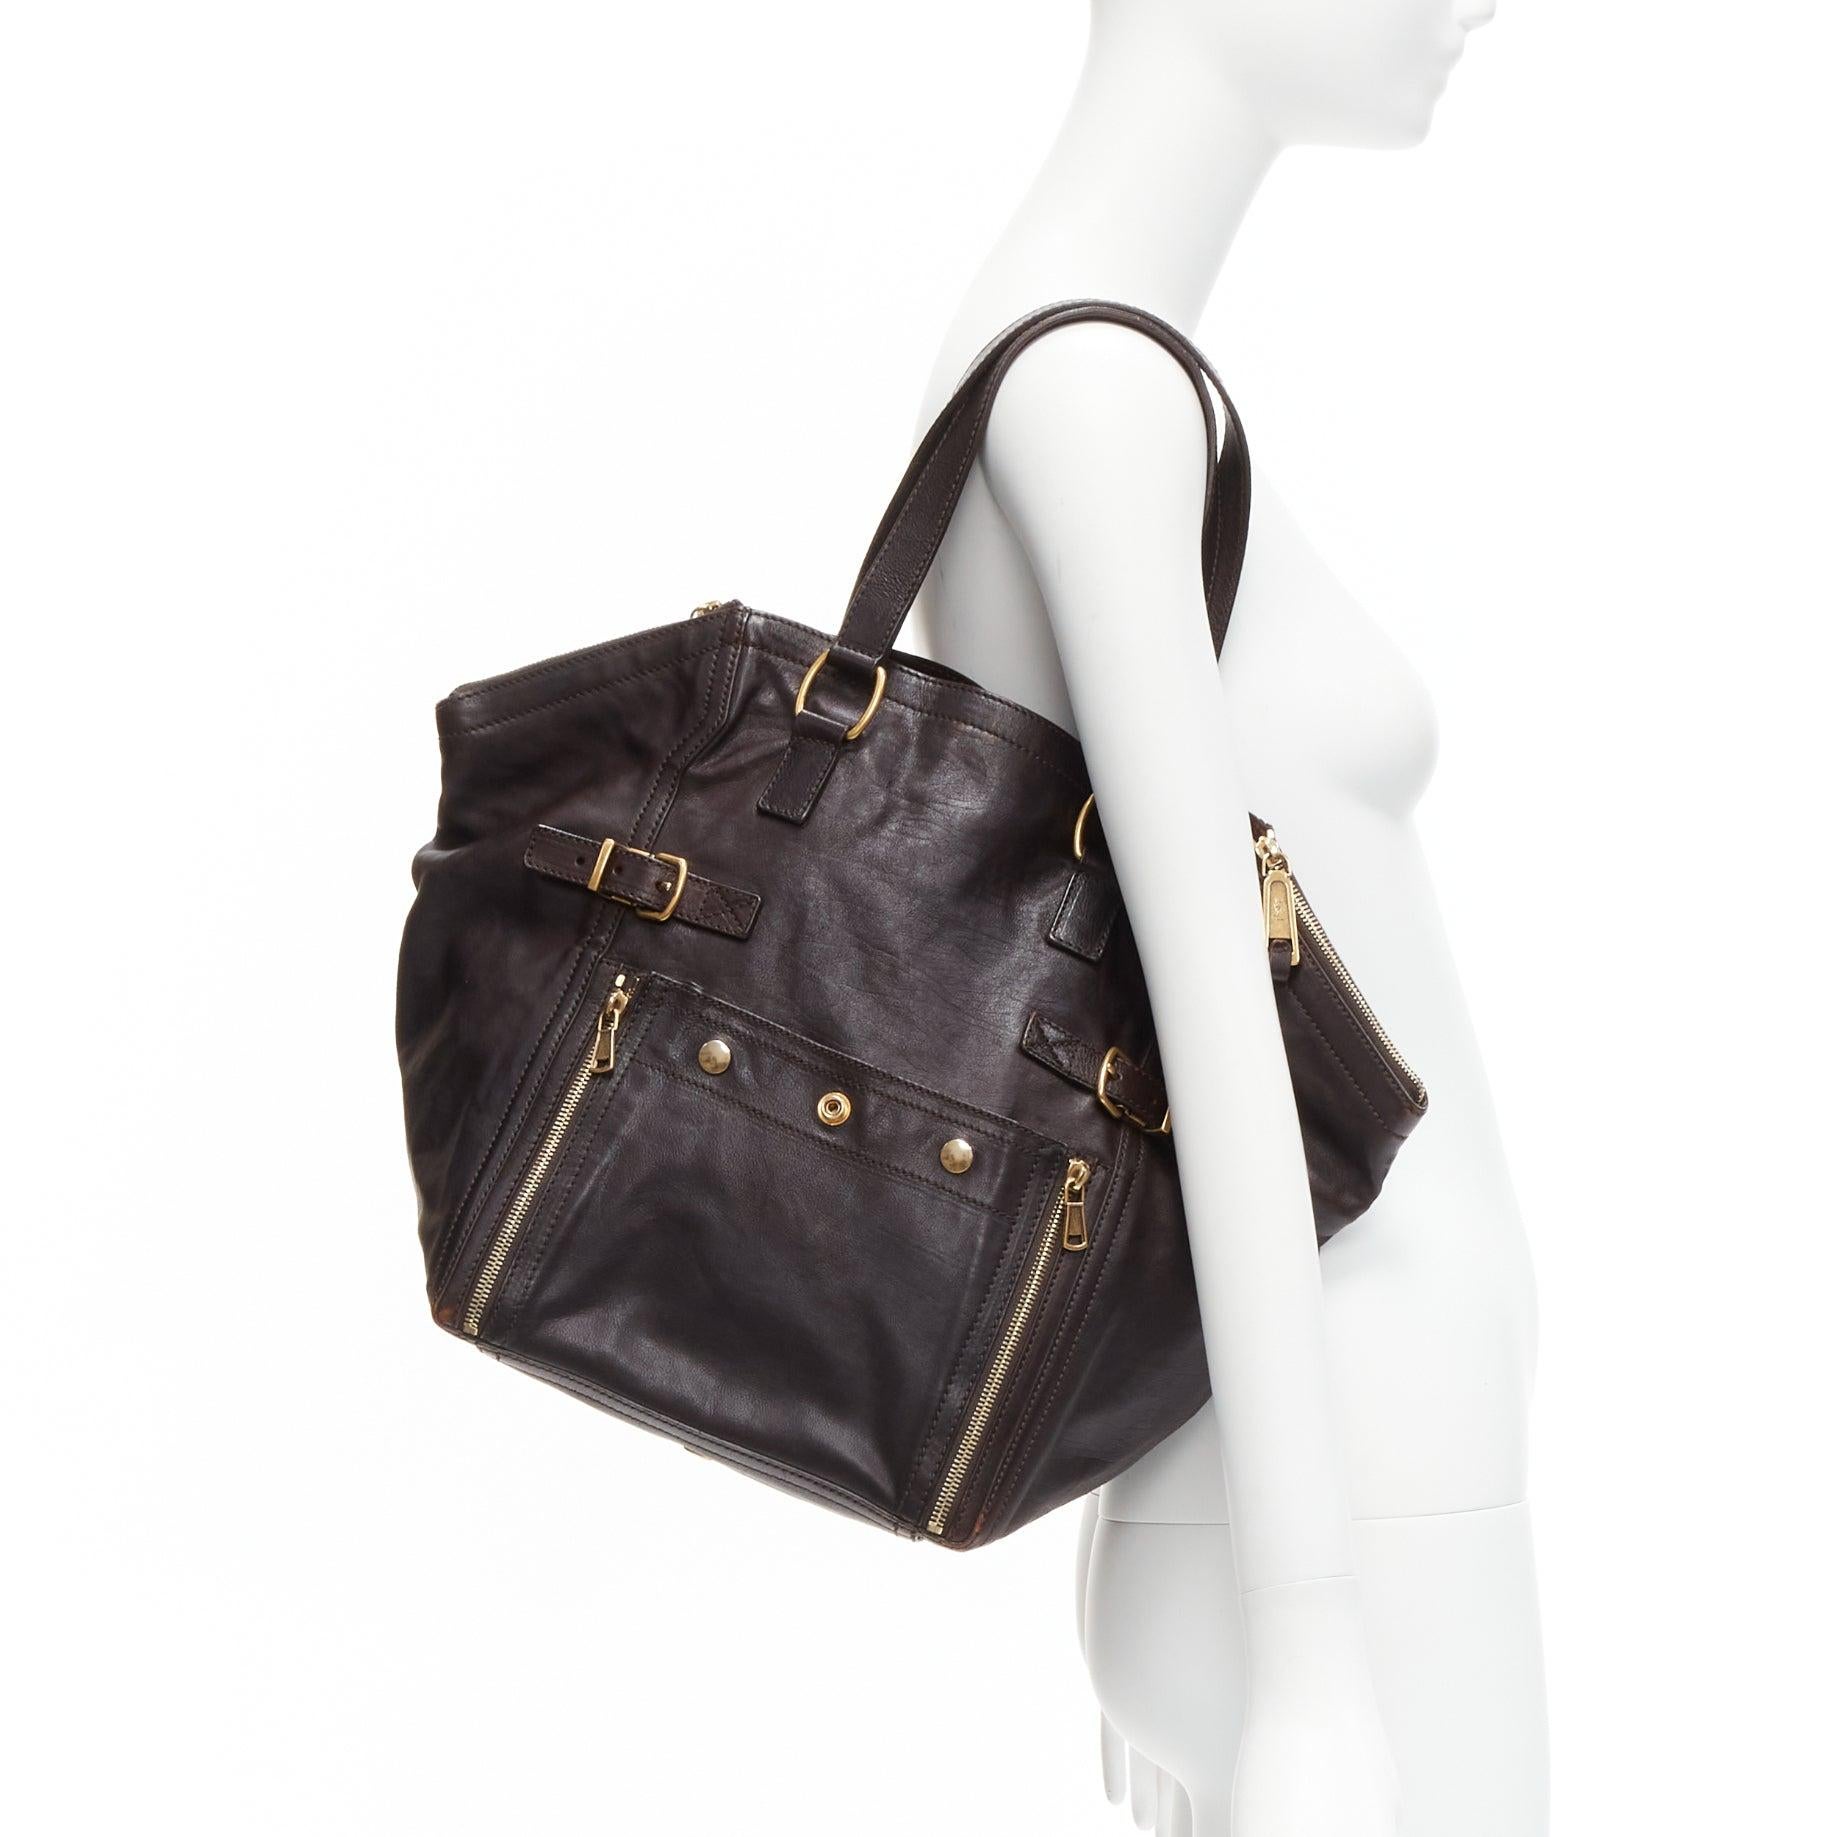 YVES SAINT LAURENT Rive Gauche Downtown dark brown leather GHW tote bag
Reference: CELE/A00030
Brand: Yves Saint Laurent
Model: Downtown
Collection: Rive Gauche
Material: Leather
Color: Brown, Gold
Pattern: Solid
Closure: Zip
Lining: Brown